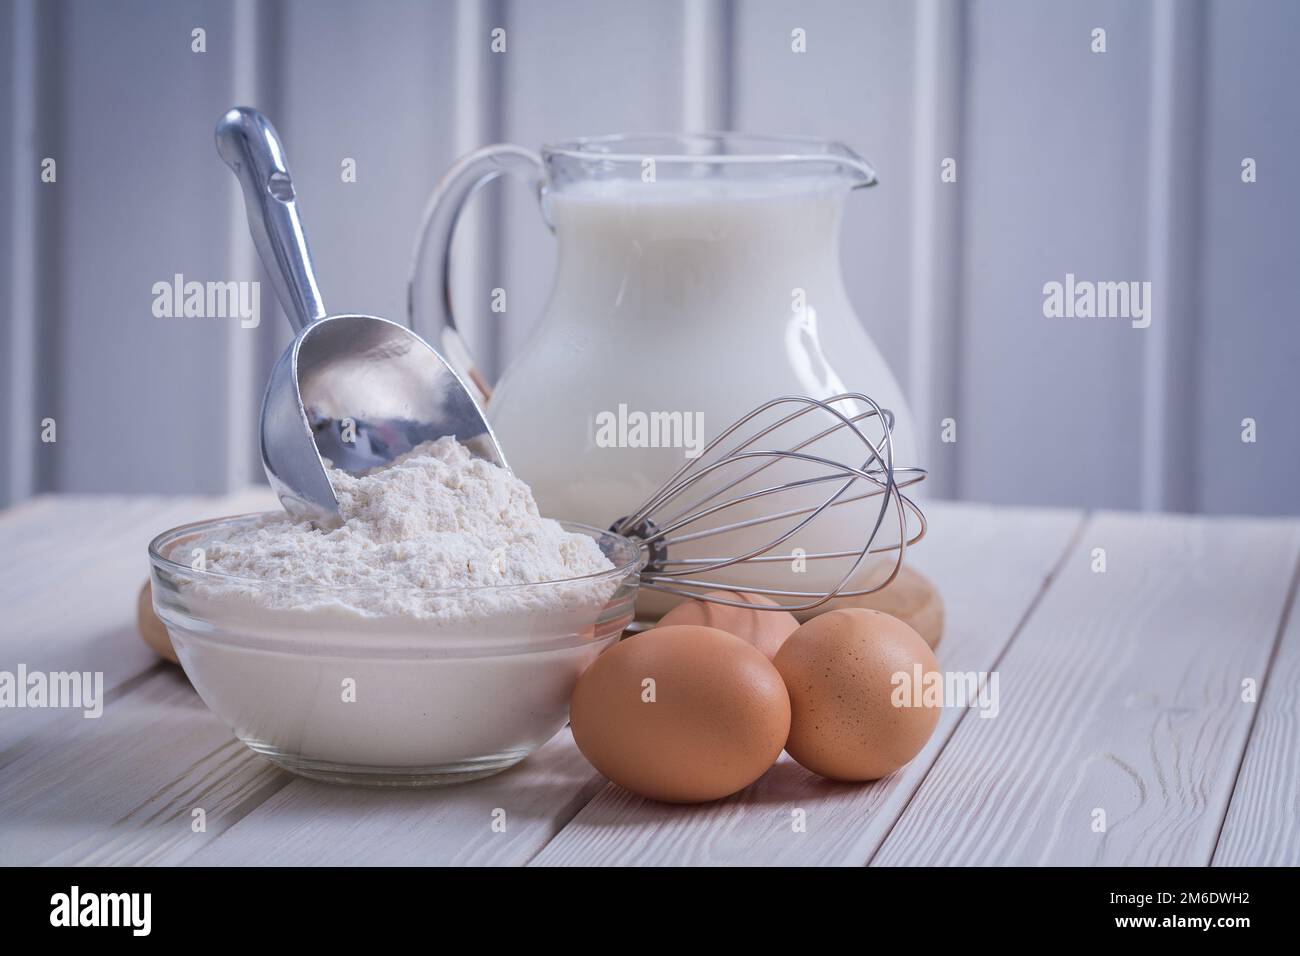 composition of kitchen objects eggs corolla bowl with flour pitcher milk on white painted old wooden board food and drink concept Stock Photo